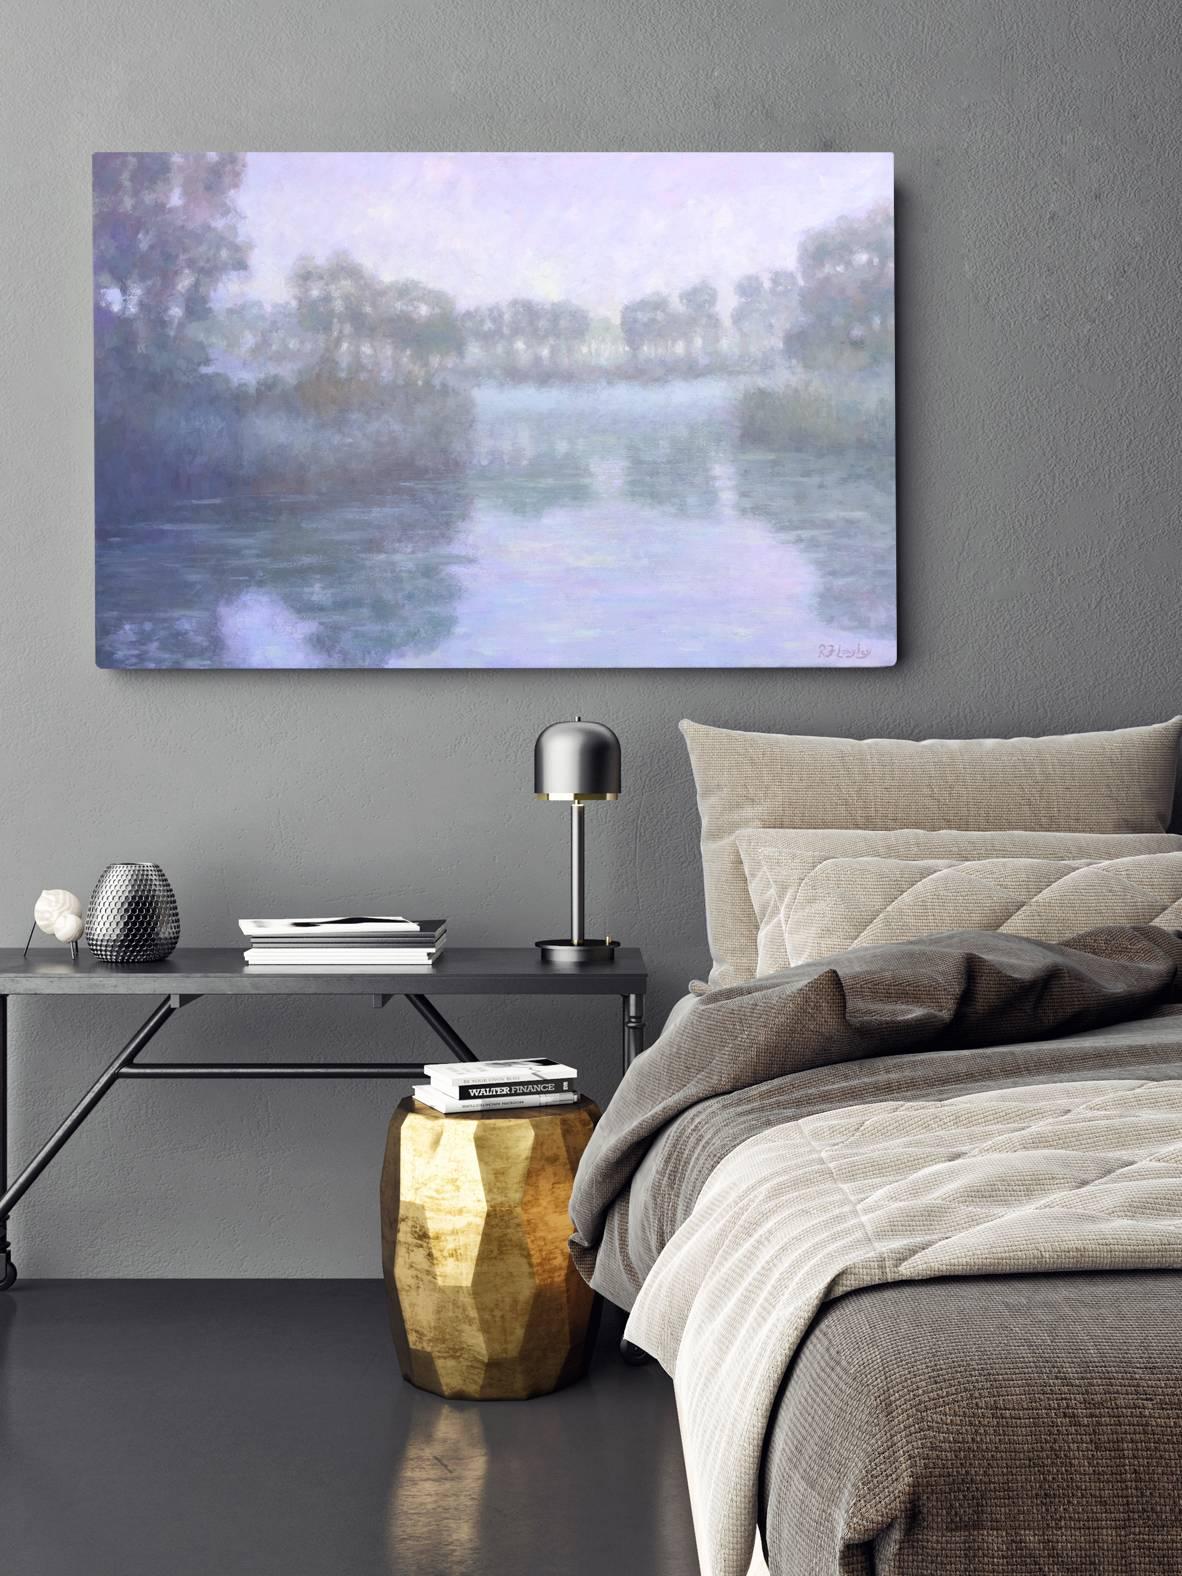 Nature, landscape, river, water, trees, season, spring, reflection, blue, purple, grey, monochromatic, green, living room, bedroom, hallway, classic, Monet

Rob Longley's training as an artist began when he first studied painting with Dick Goetz at